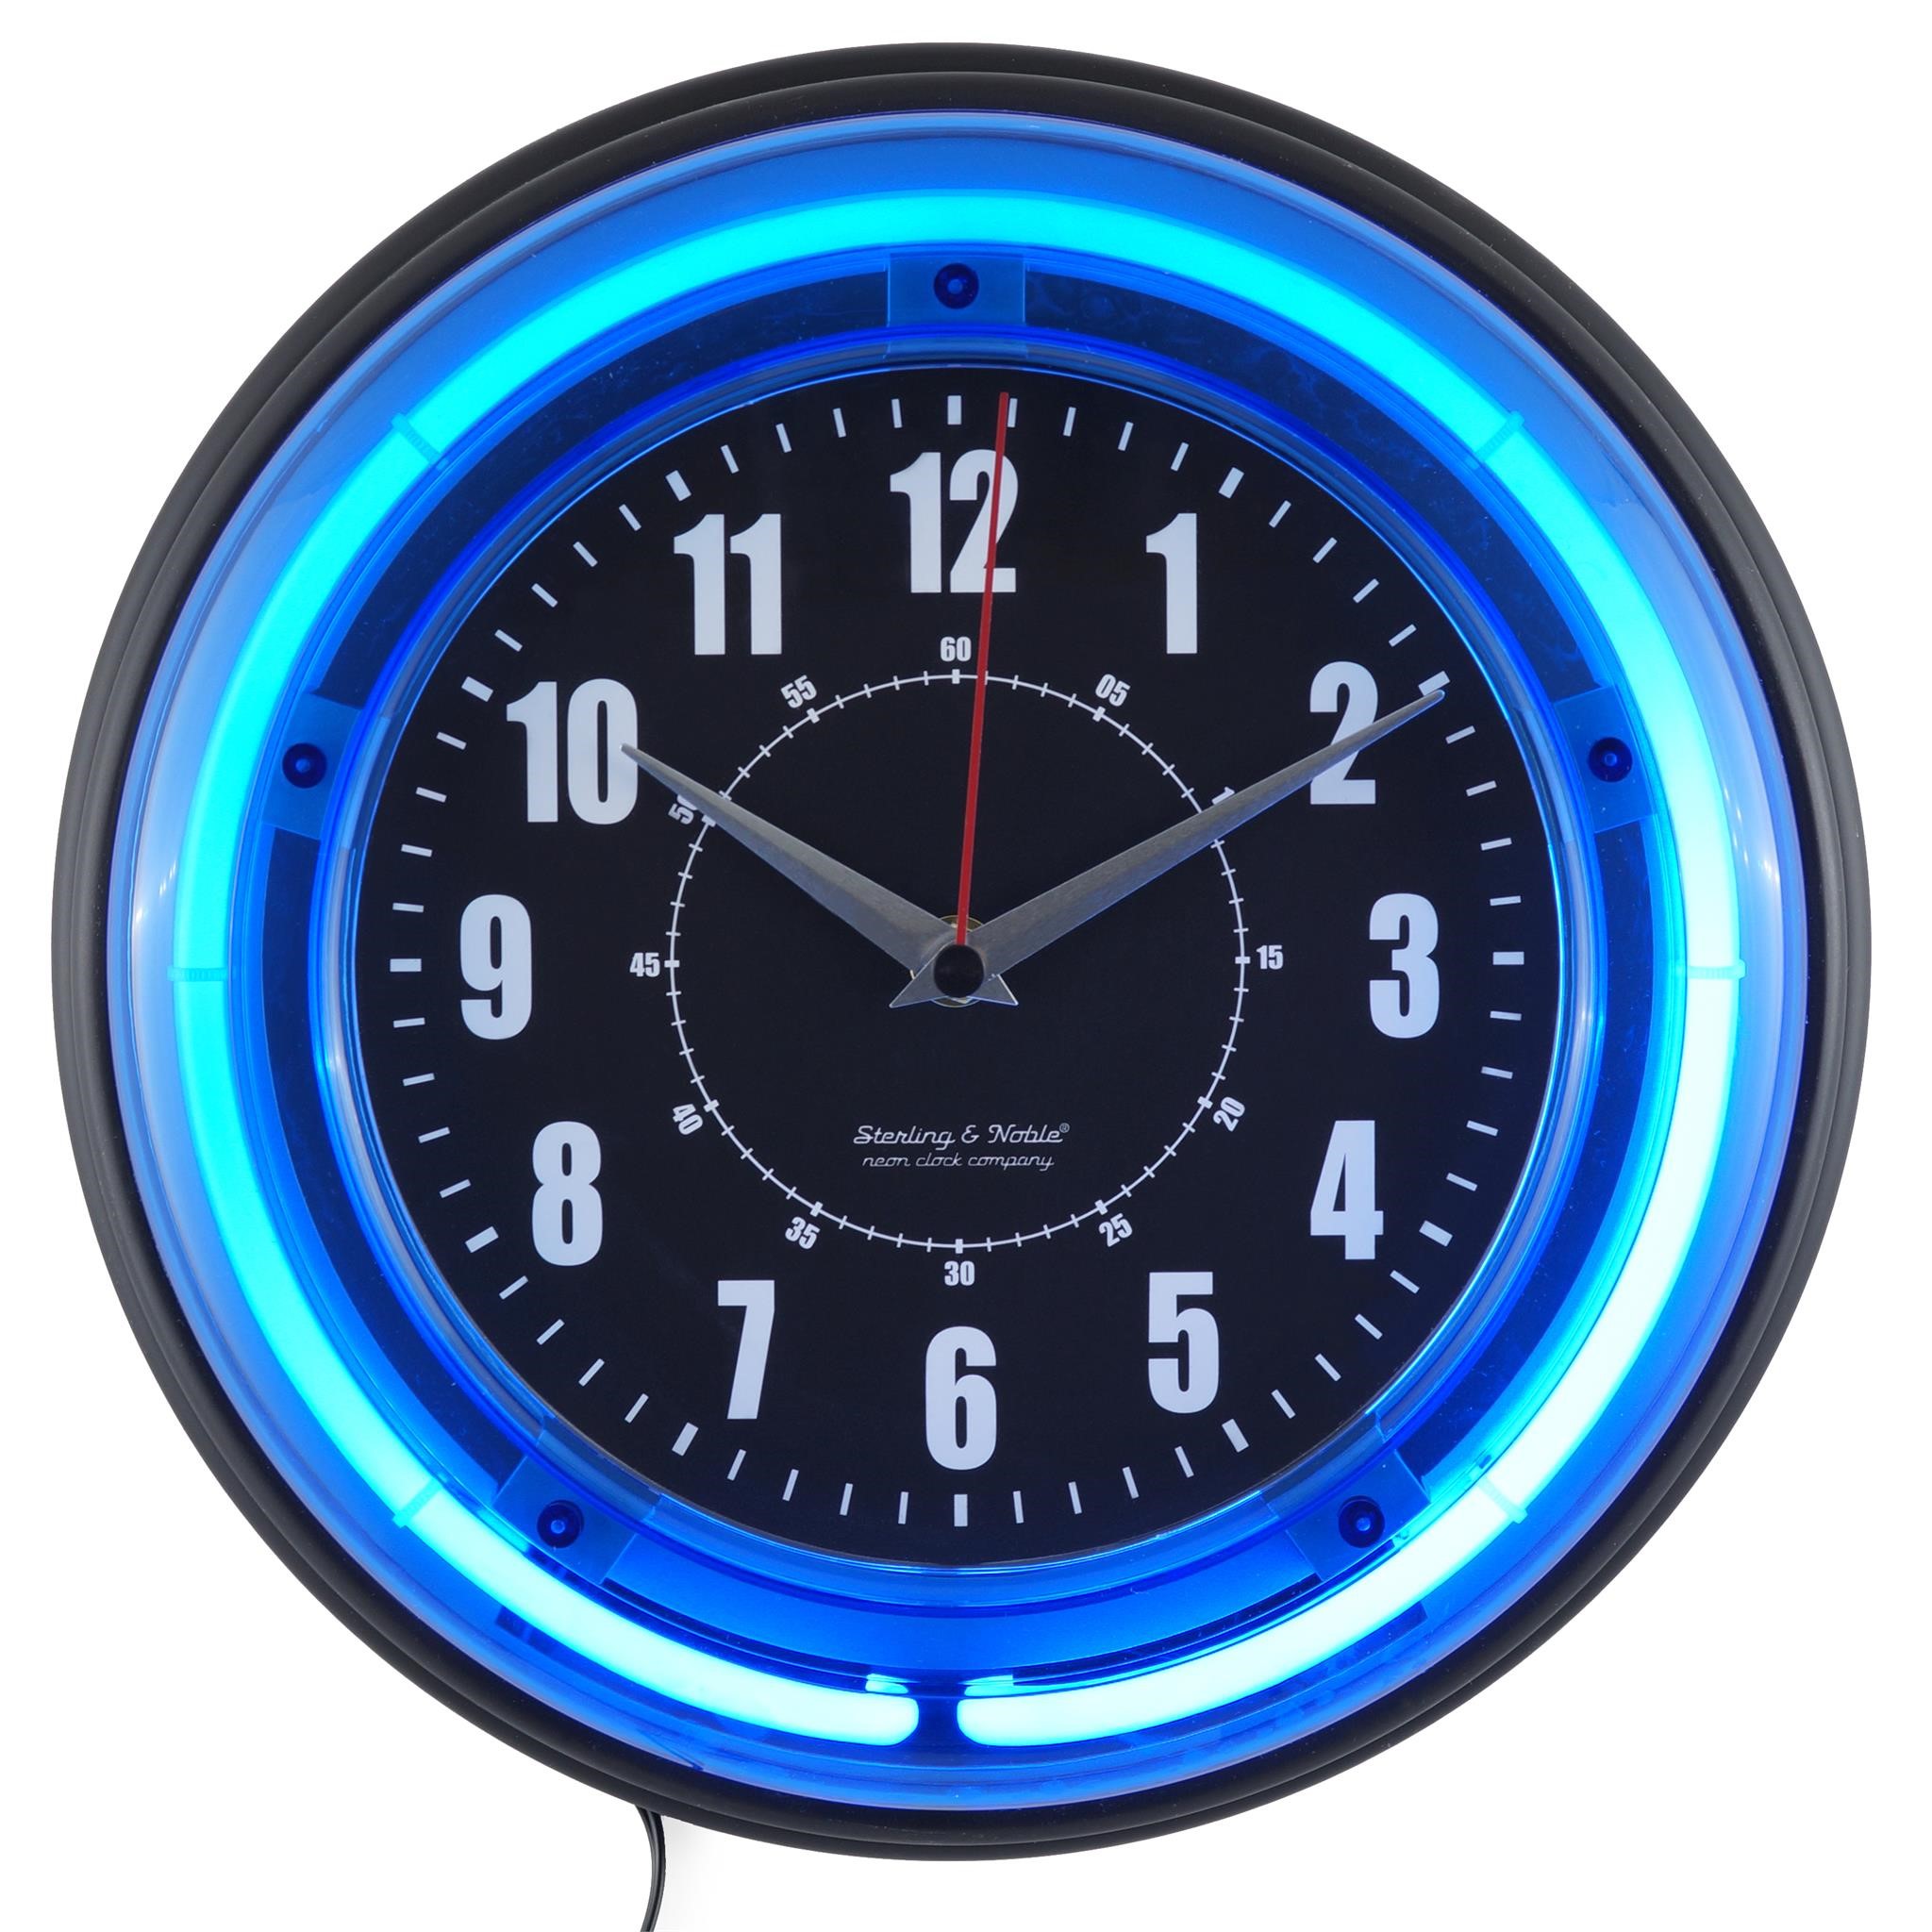 Sterling and Noble Blue Neon Analog Wall Clock